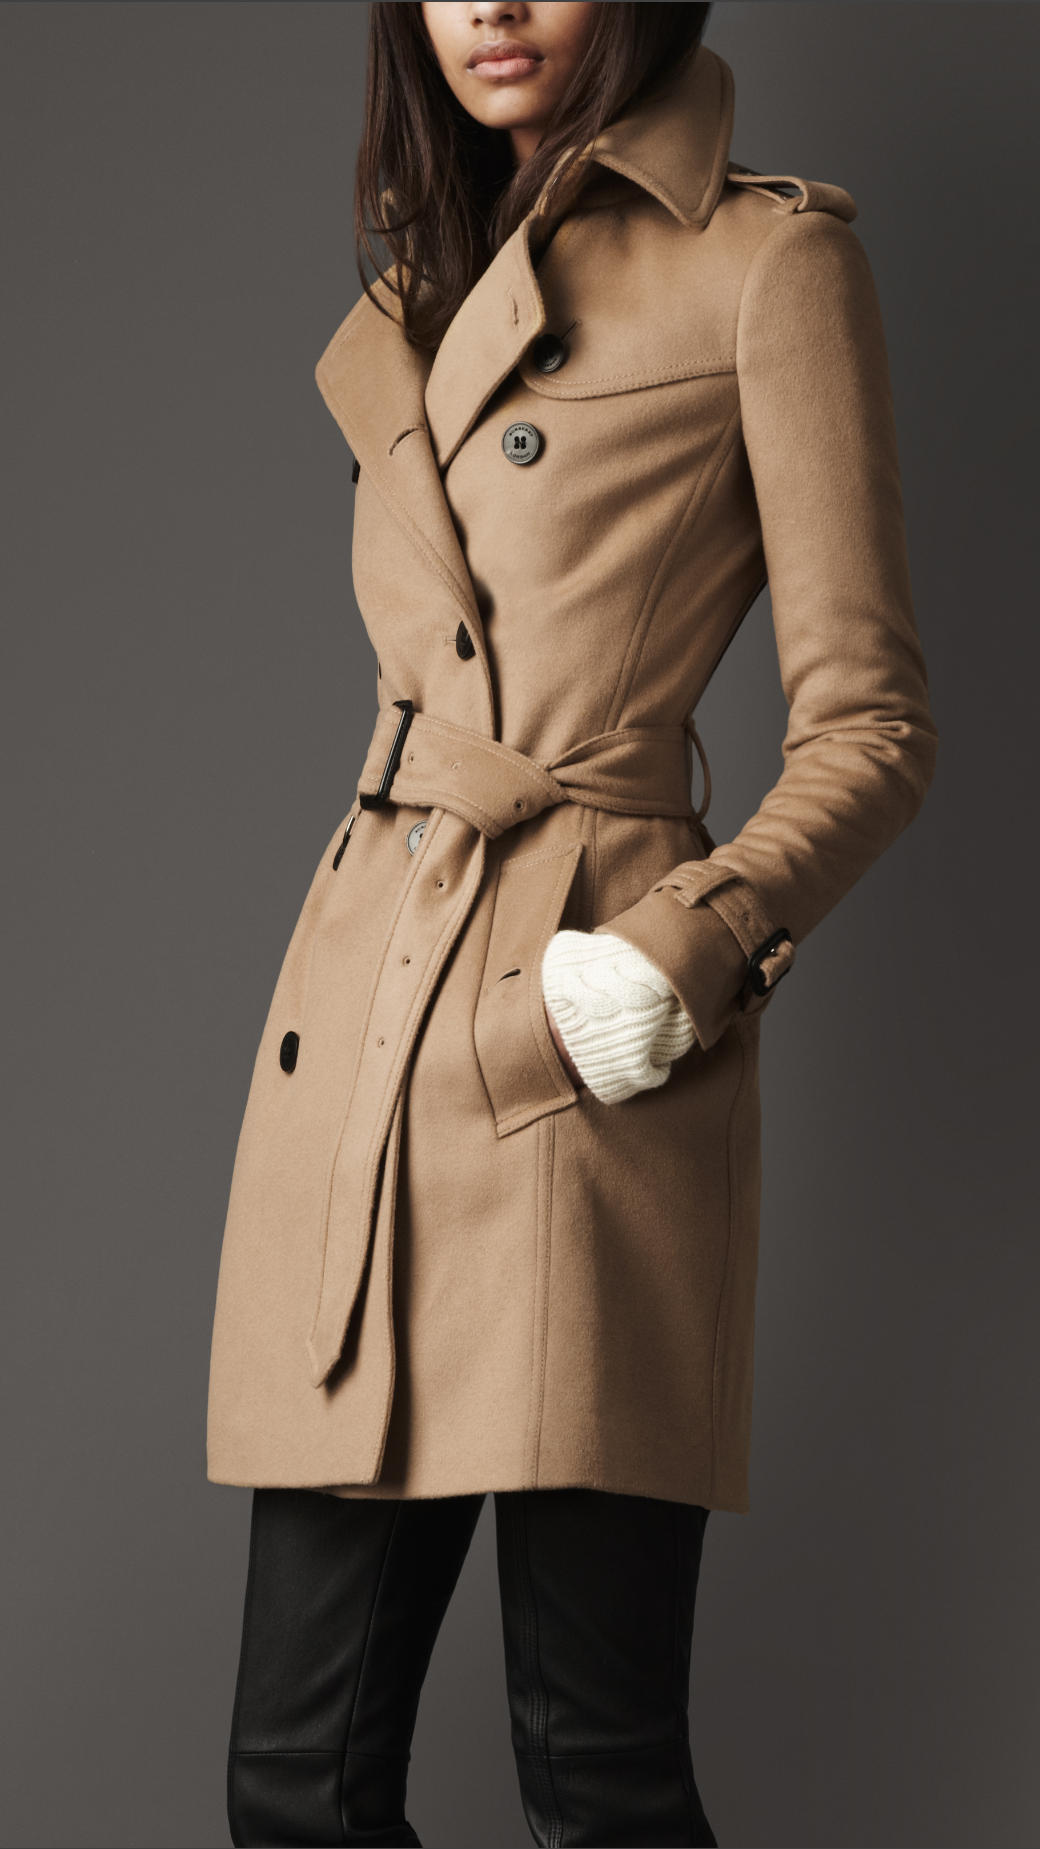 Burberry Midlength Wool Cashmere Trench Coat in Camel (Natural) - Lyst